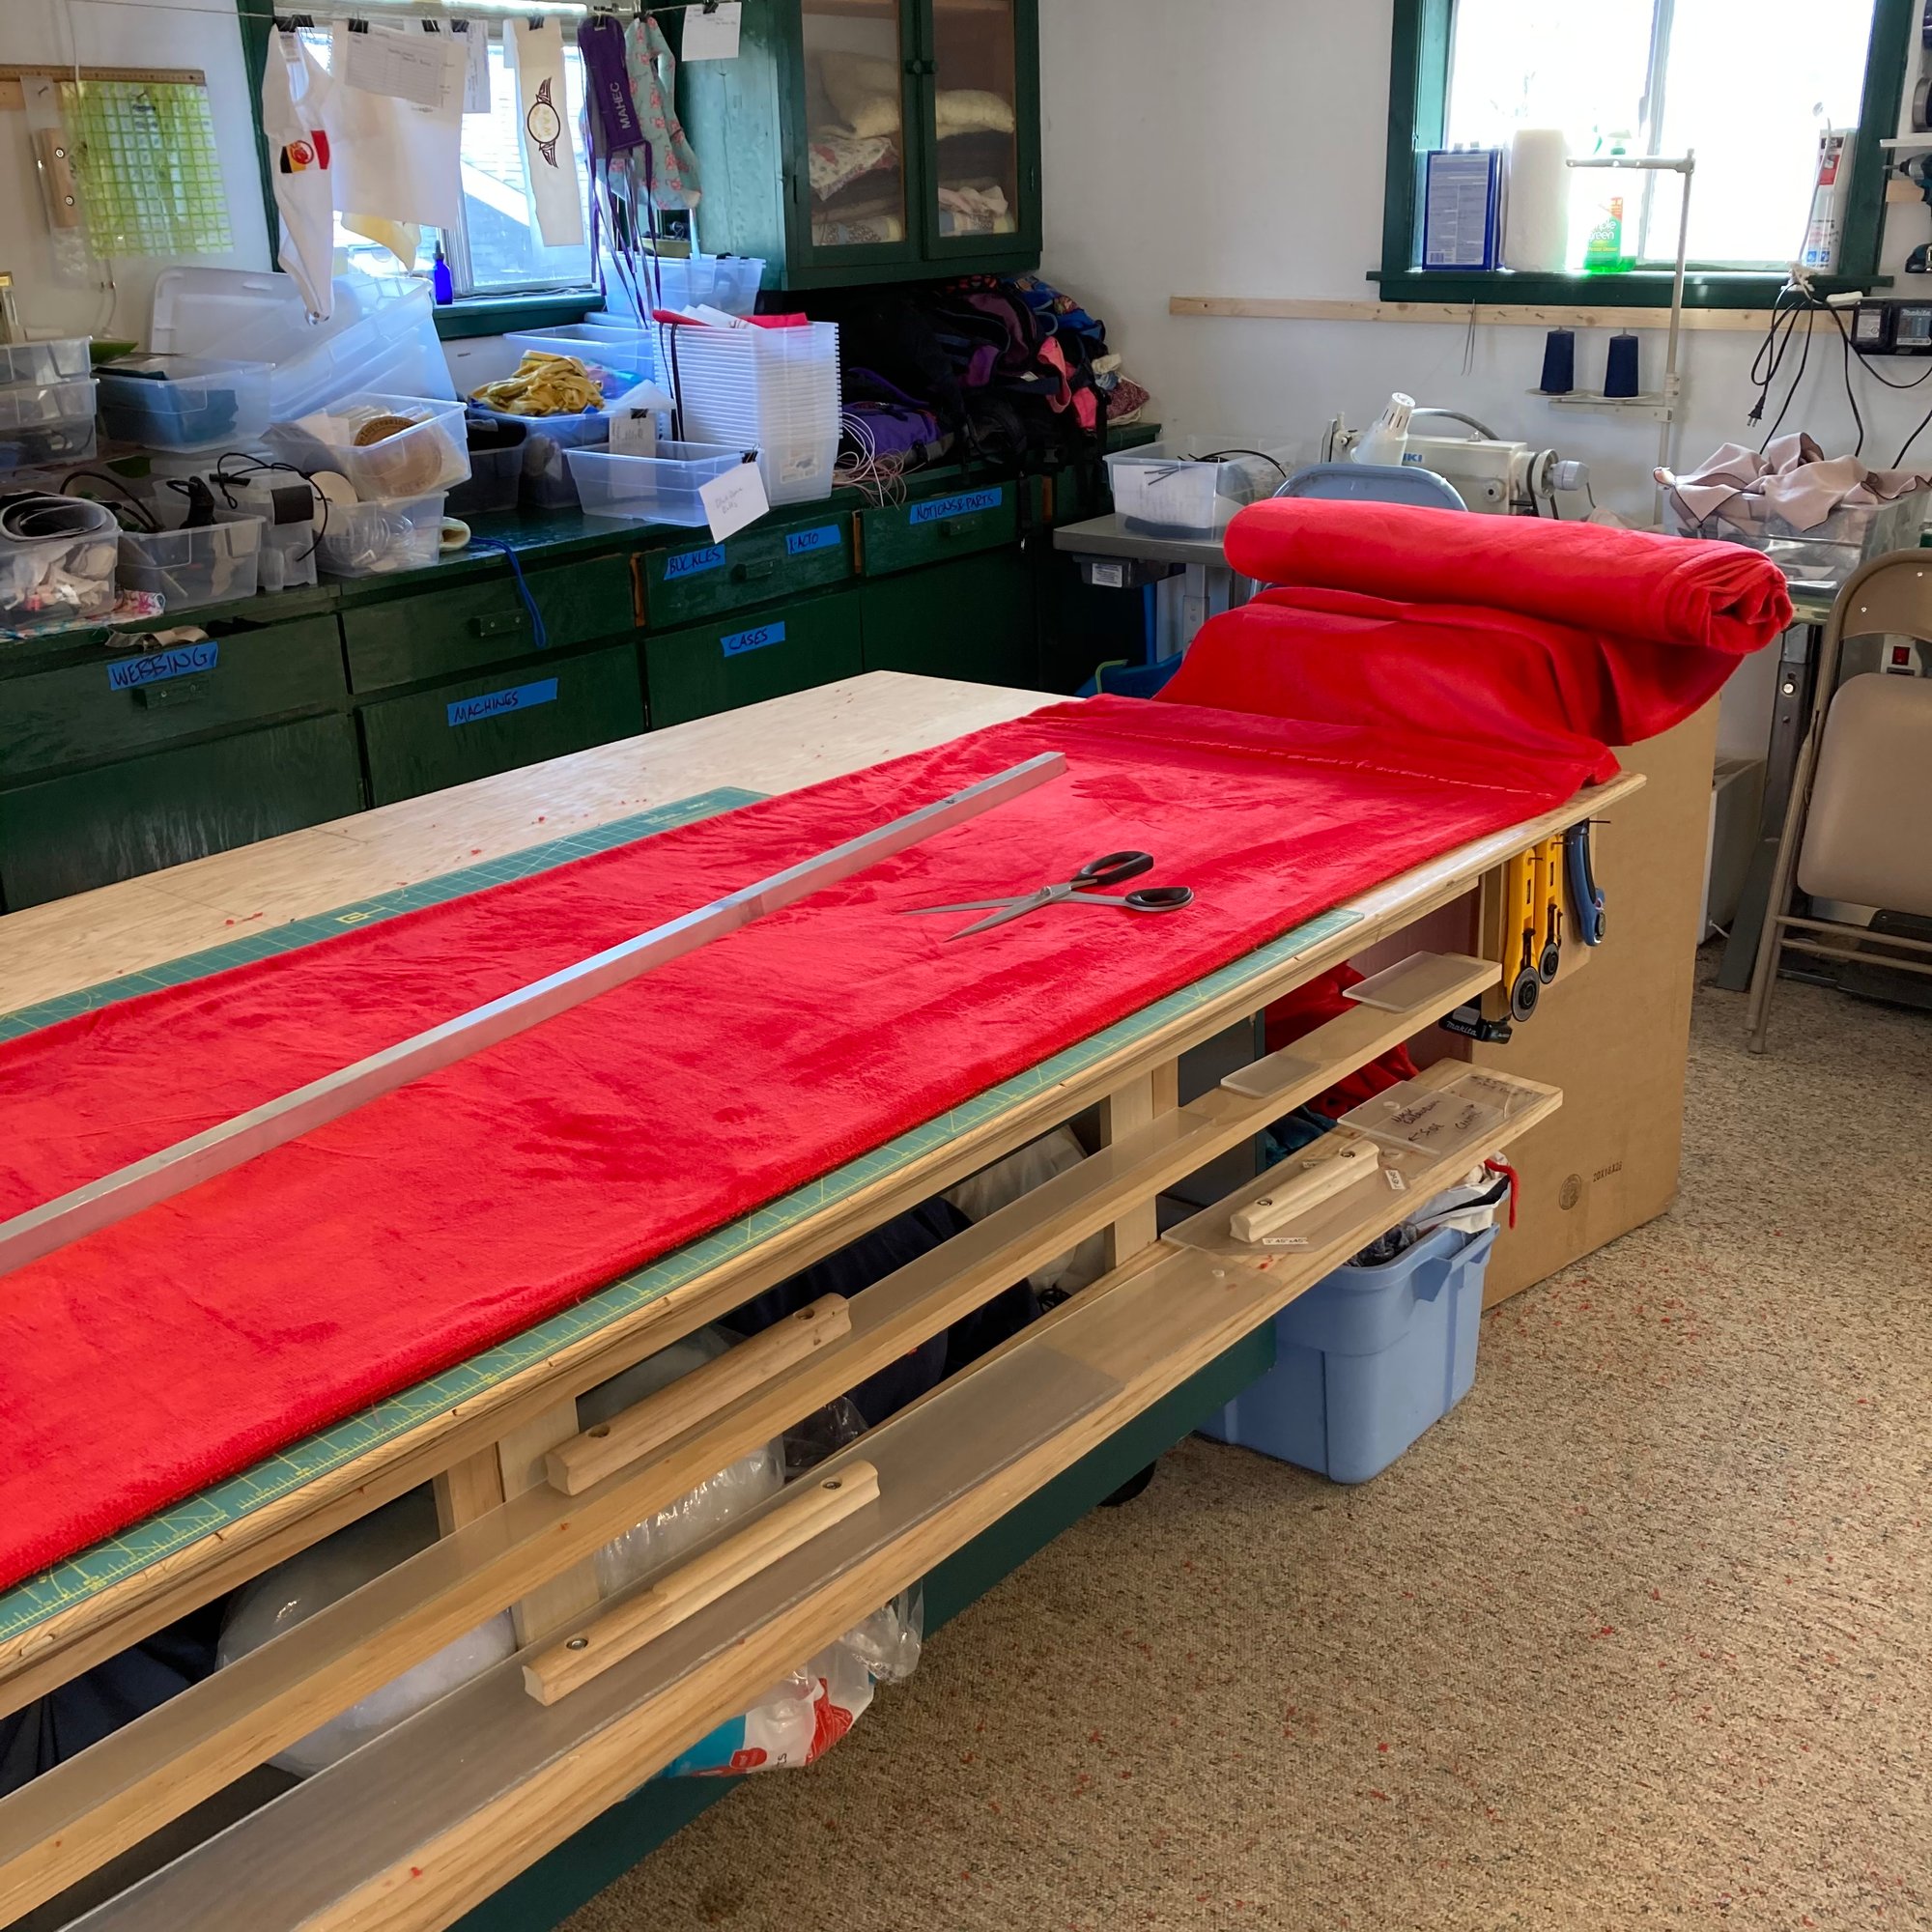 An image of a red fleece sleep sack on the cutting table.